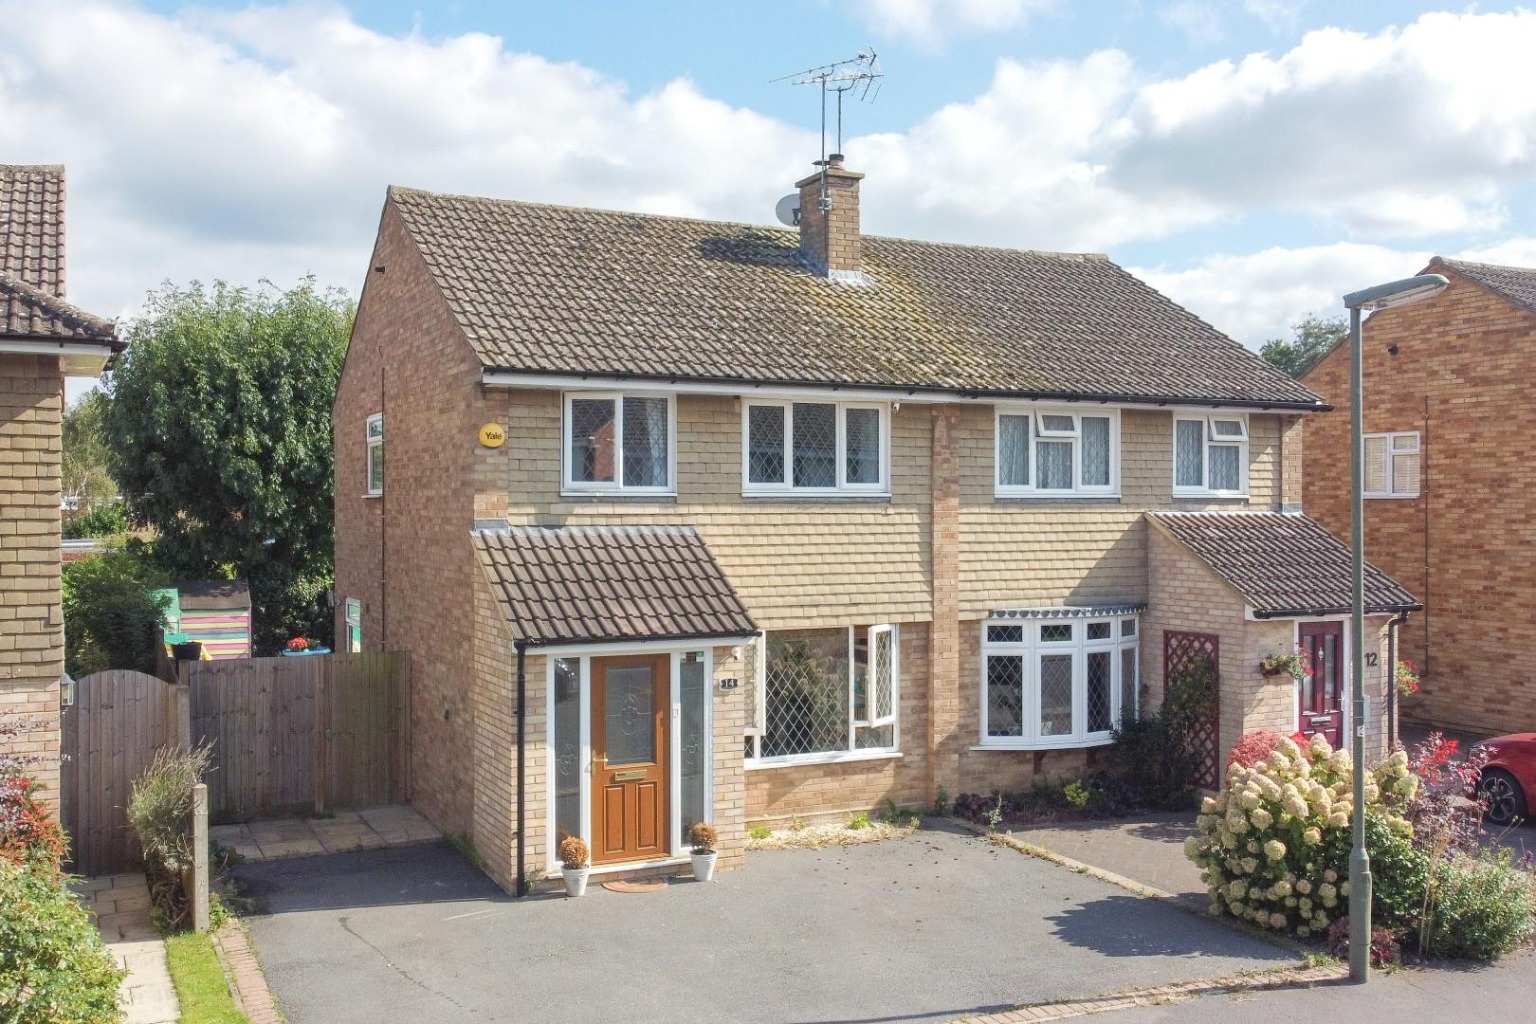 3 bed semi-detached house for sale in Gloucester Road, Bagshot, GU19